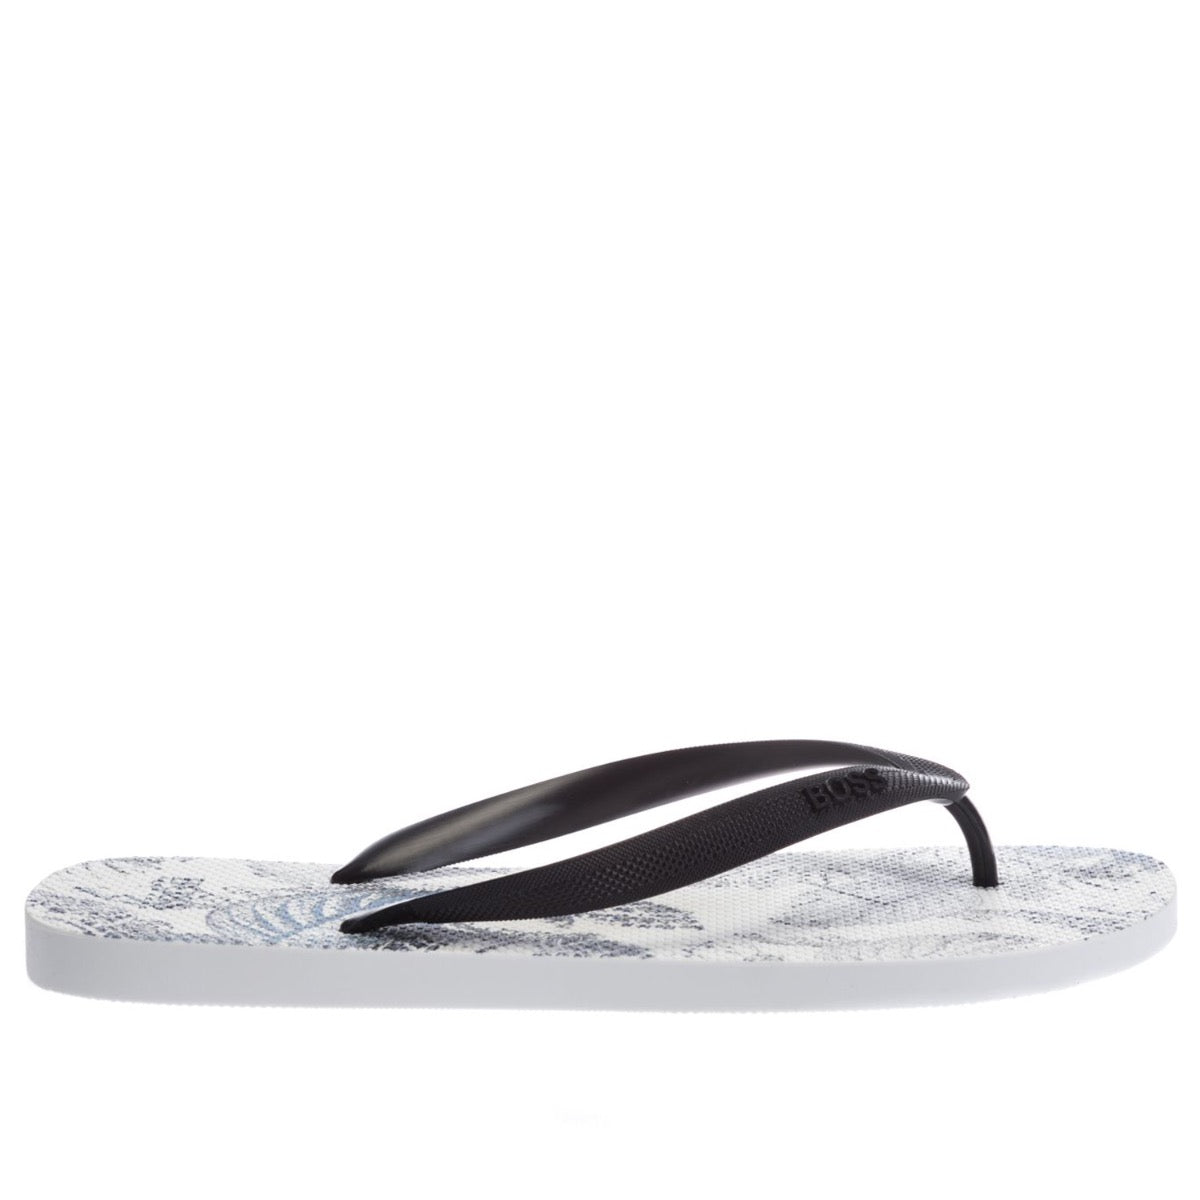 BOSS Pacific_THNG_BT Flip Flop in White Main